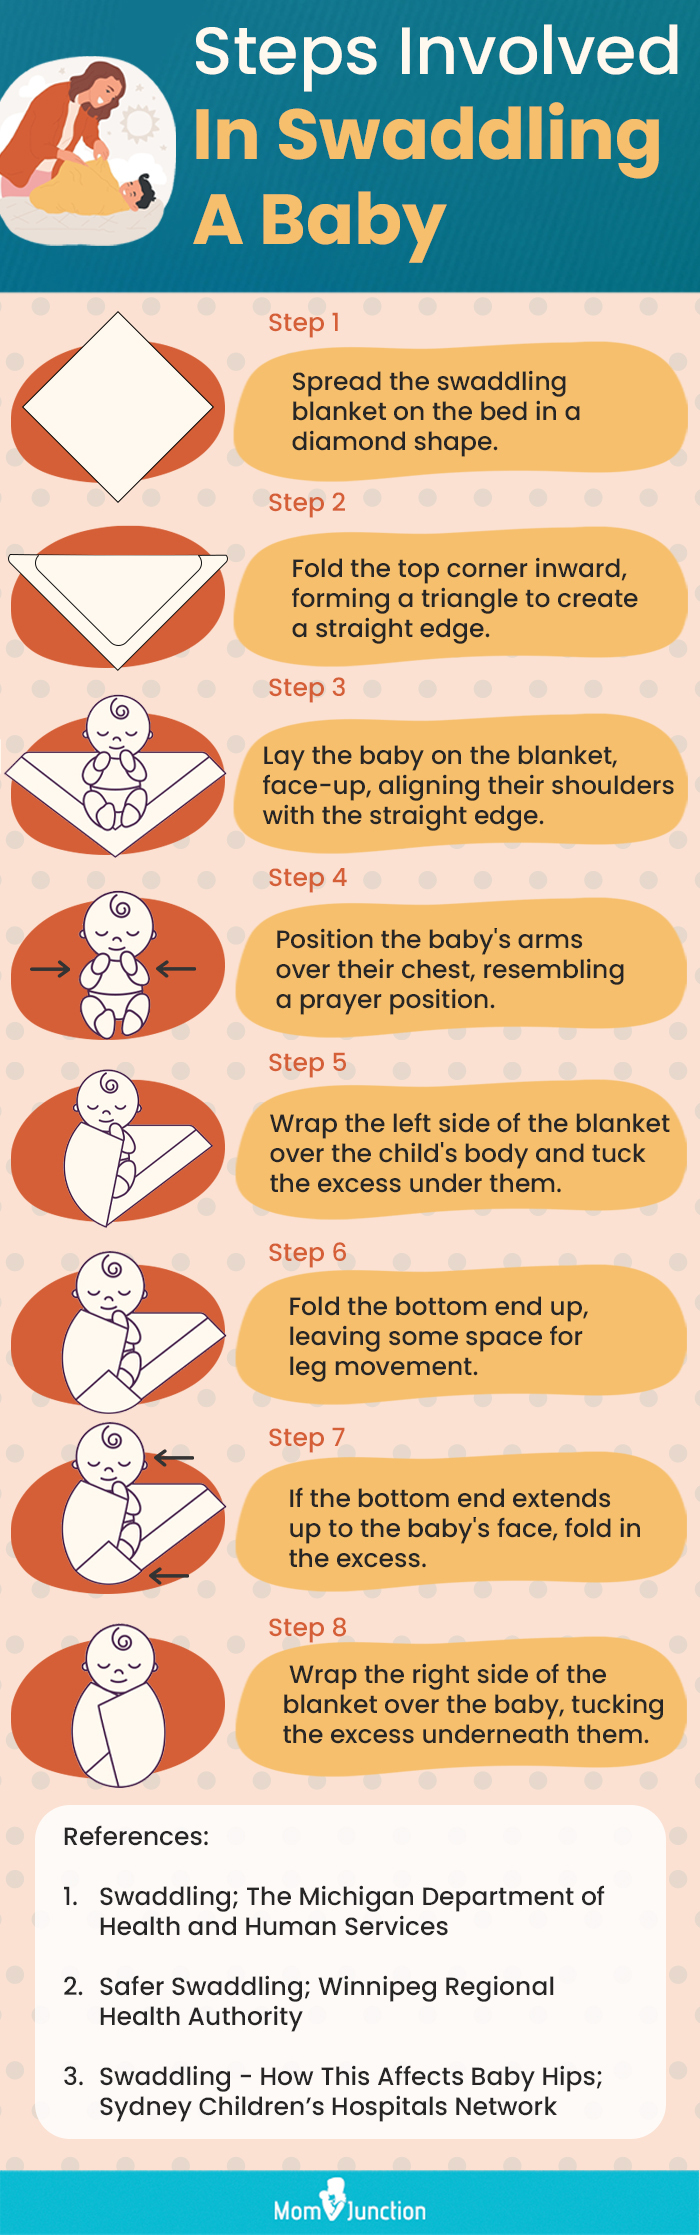 Steps Involved In Swaddling A Baby (infographic)